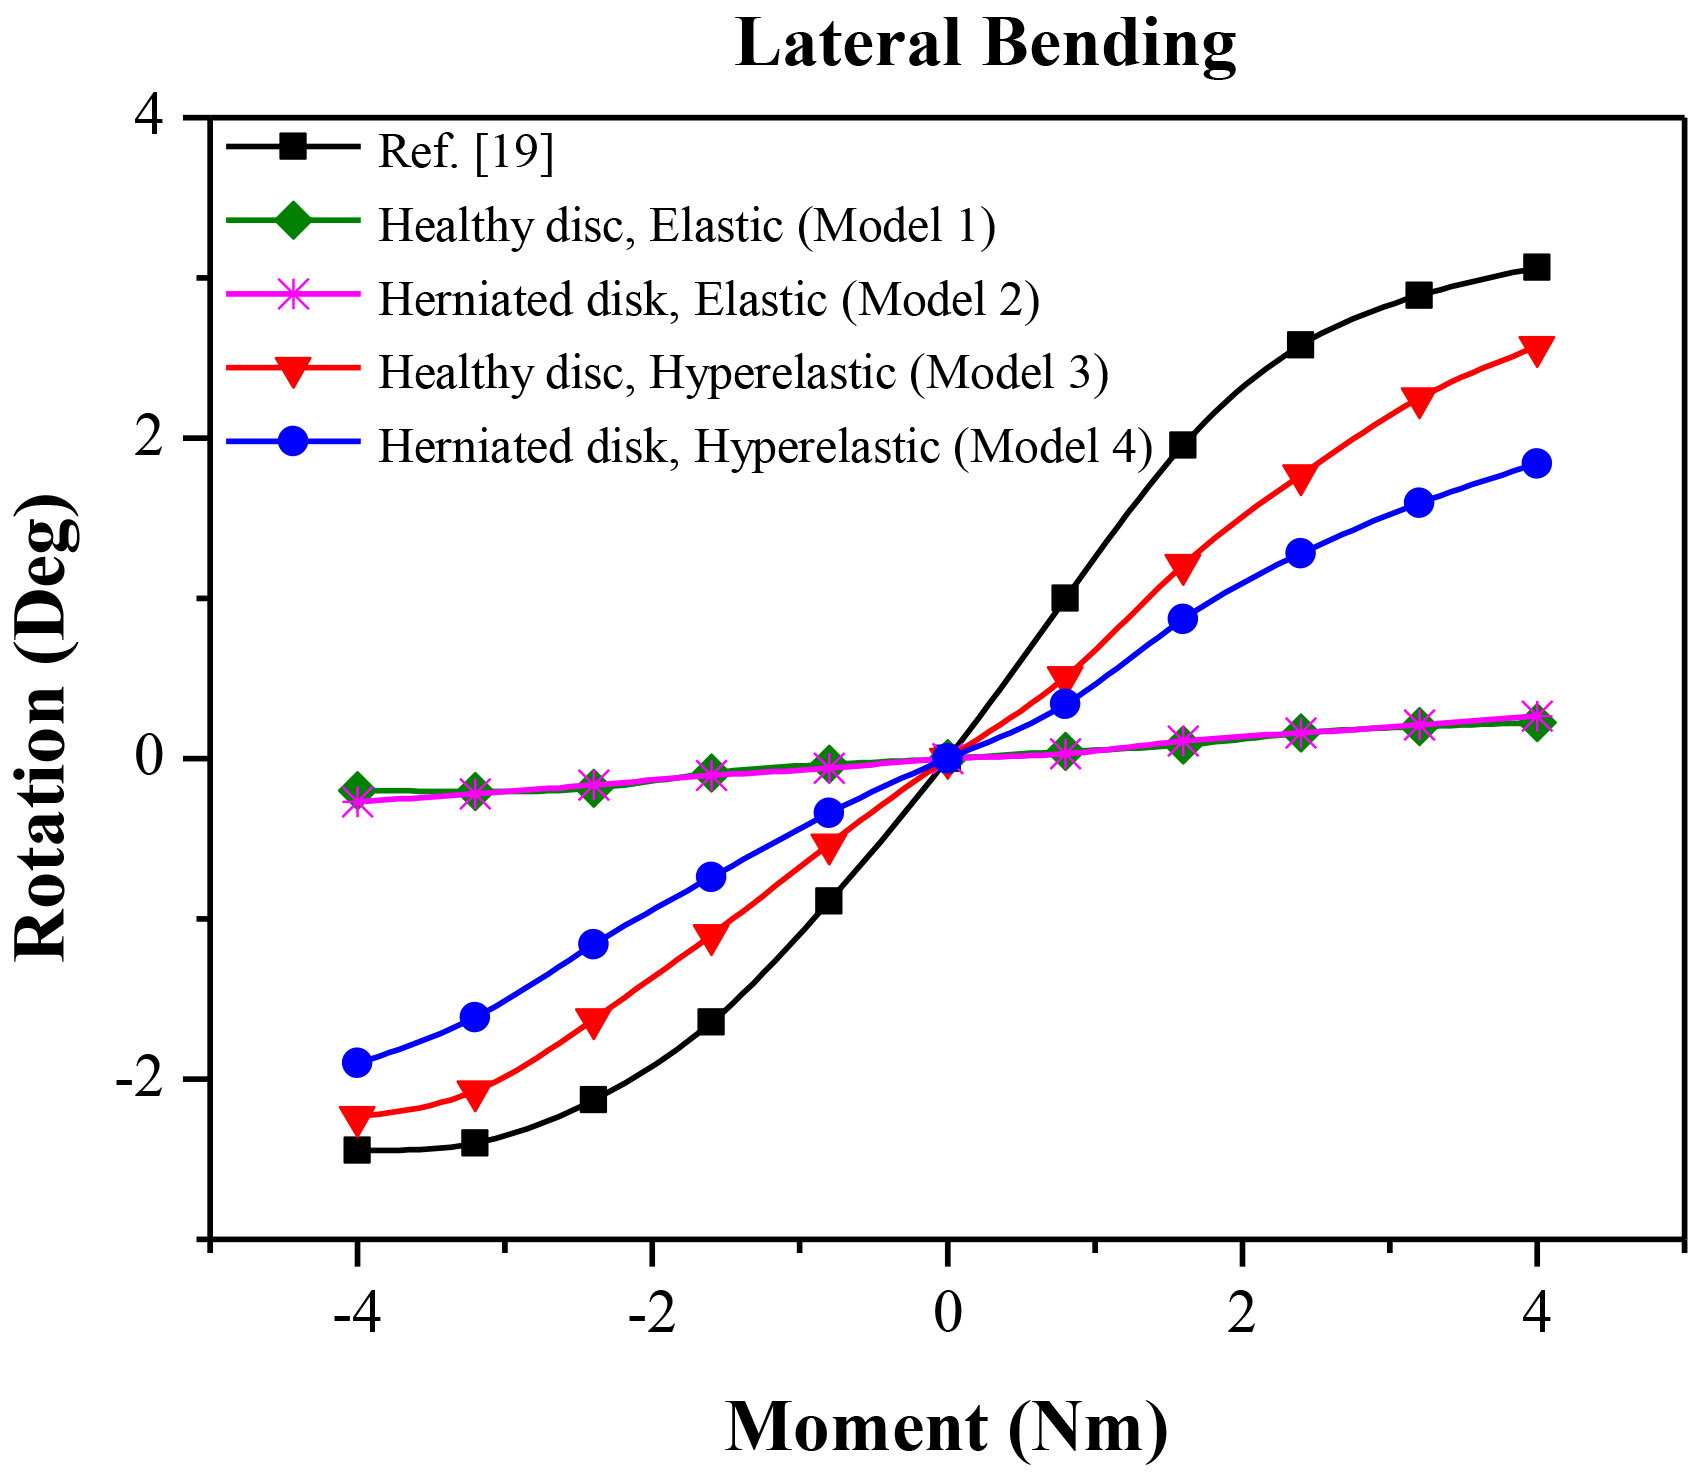 Rotation of lateral bending under moments of 0 Nm–4 Nm.